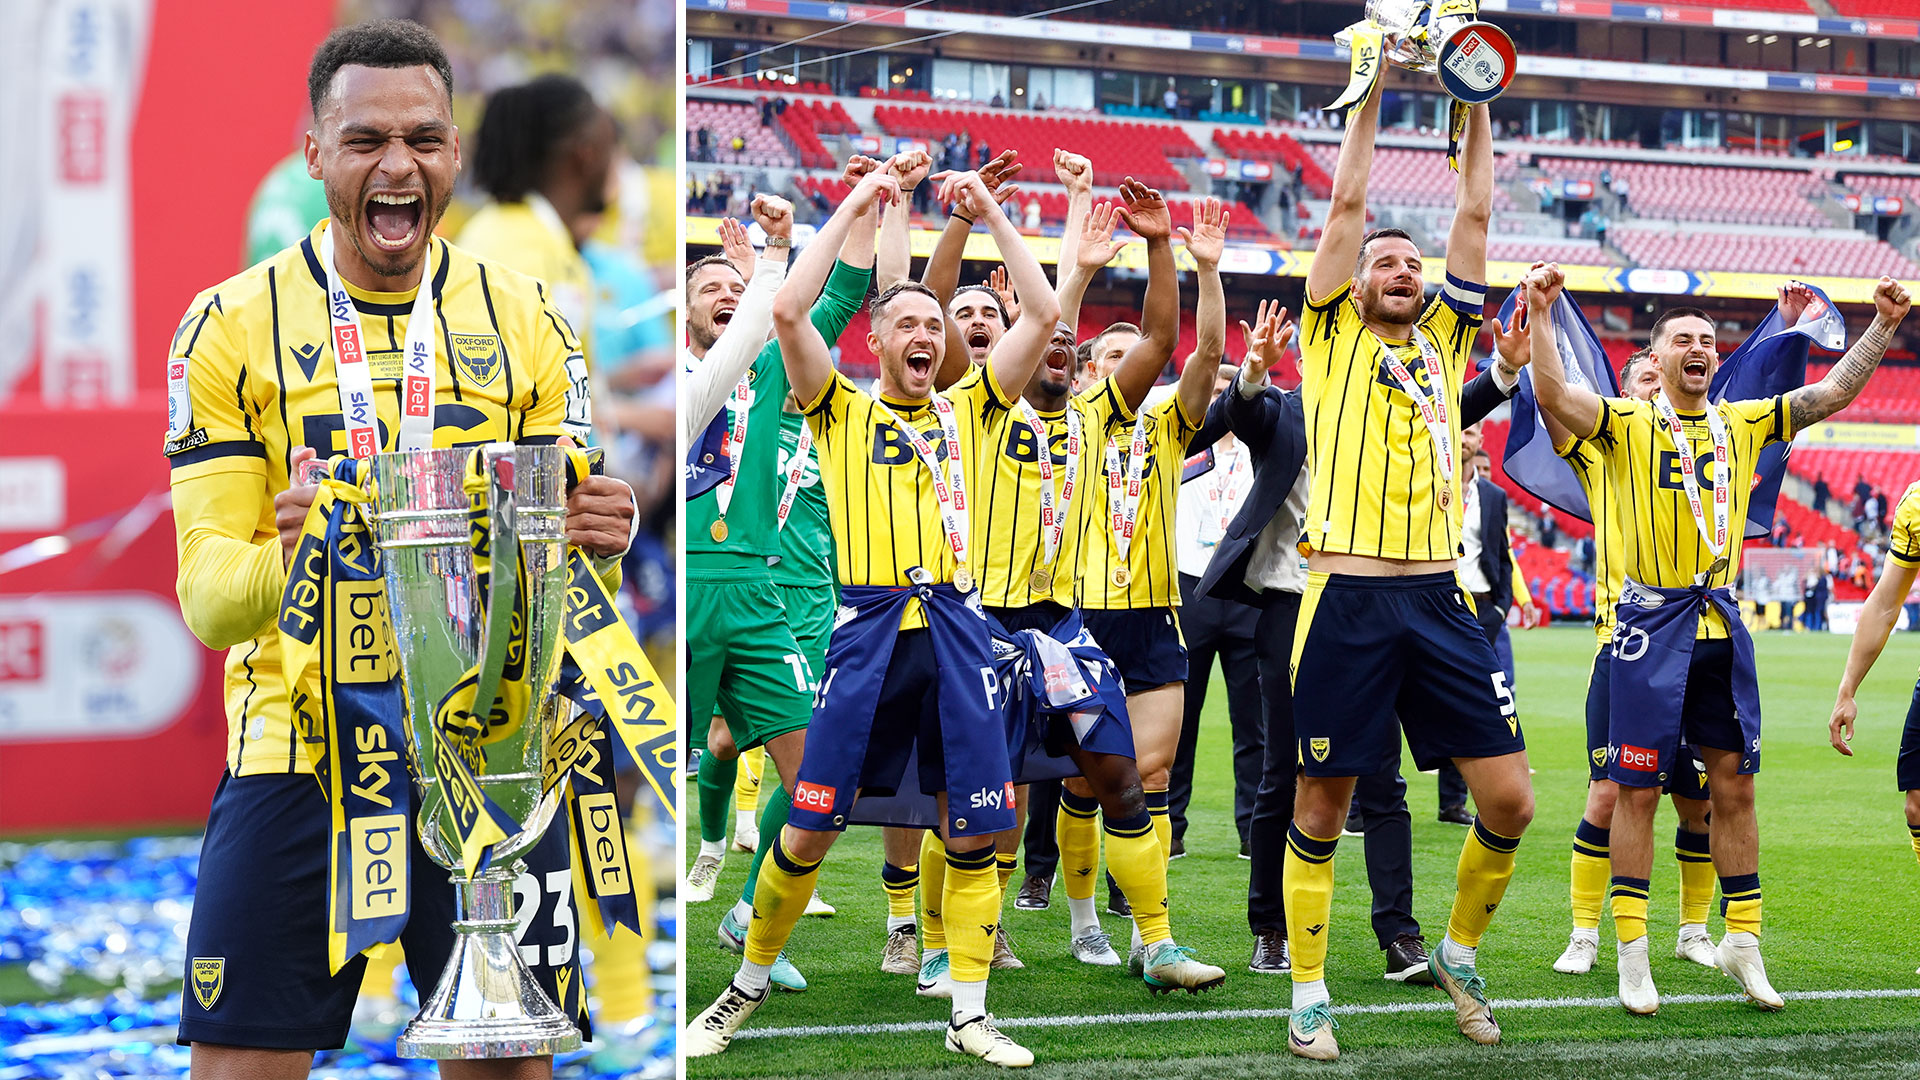 Oxford PROMOTED to Championship after beating Bolton in League One playoff final just 14 years after playing non-league [Video]